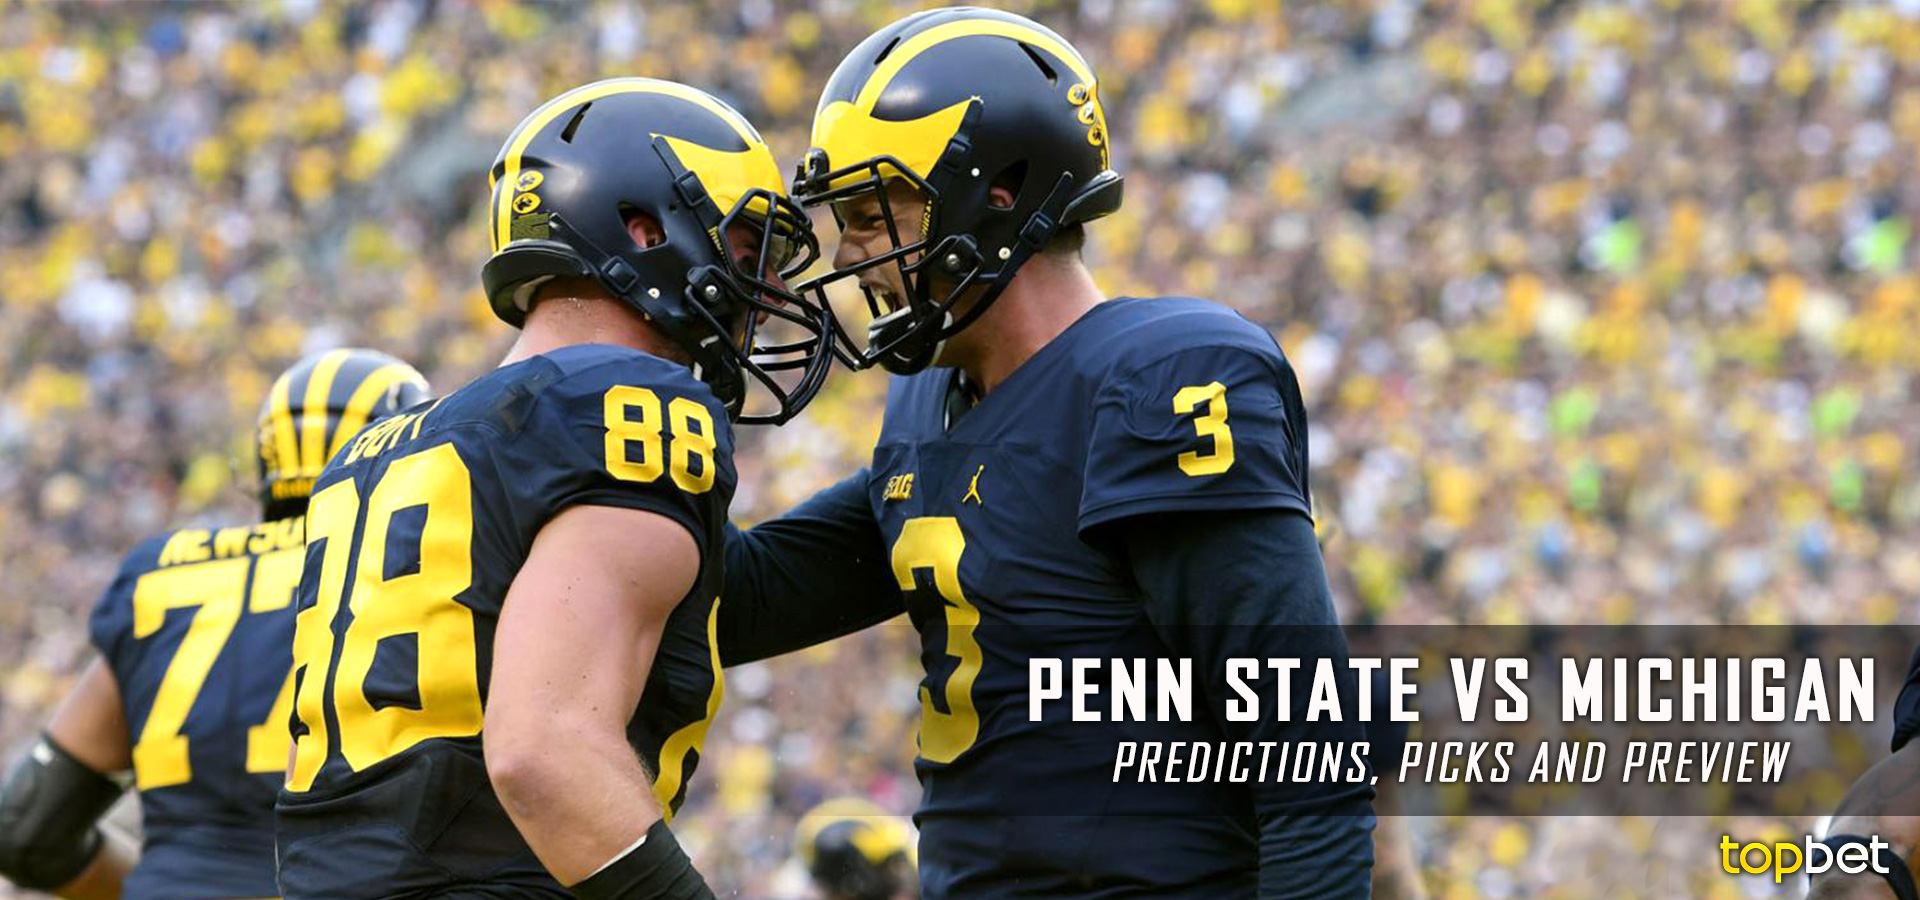 Penn State vs Michigan Predictions, Picks, Odds and Preview1920 x 900